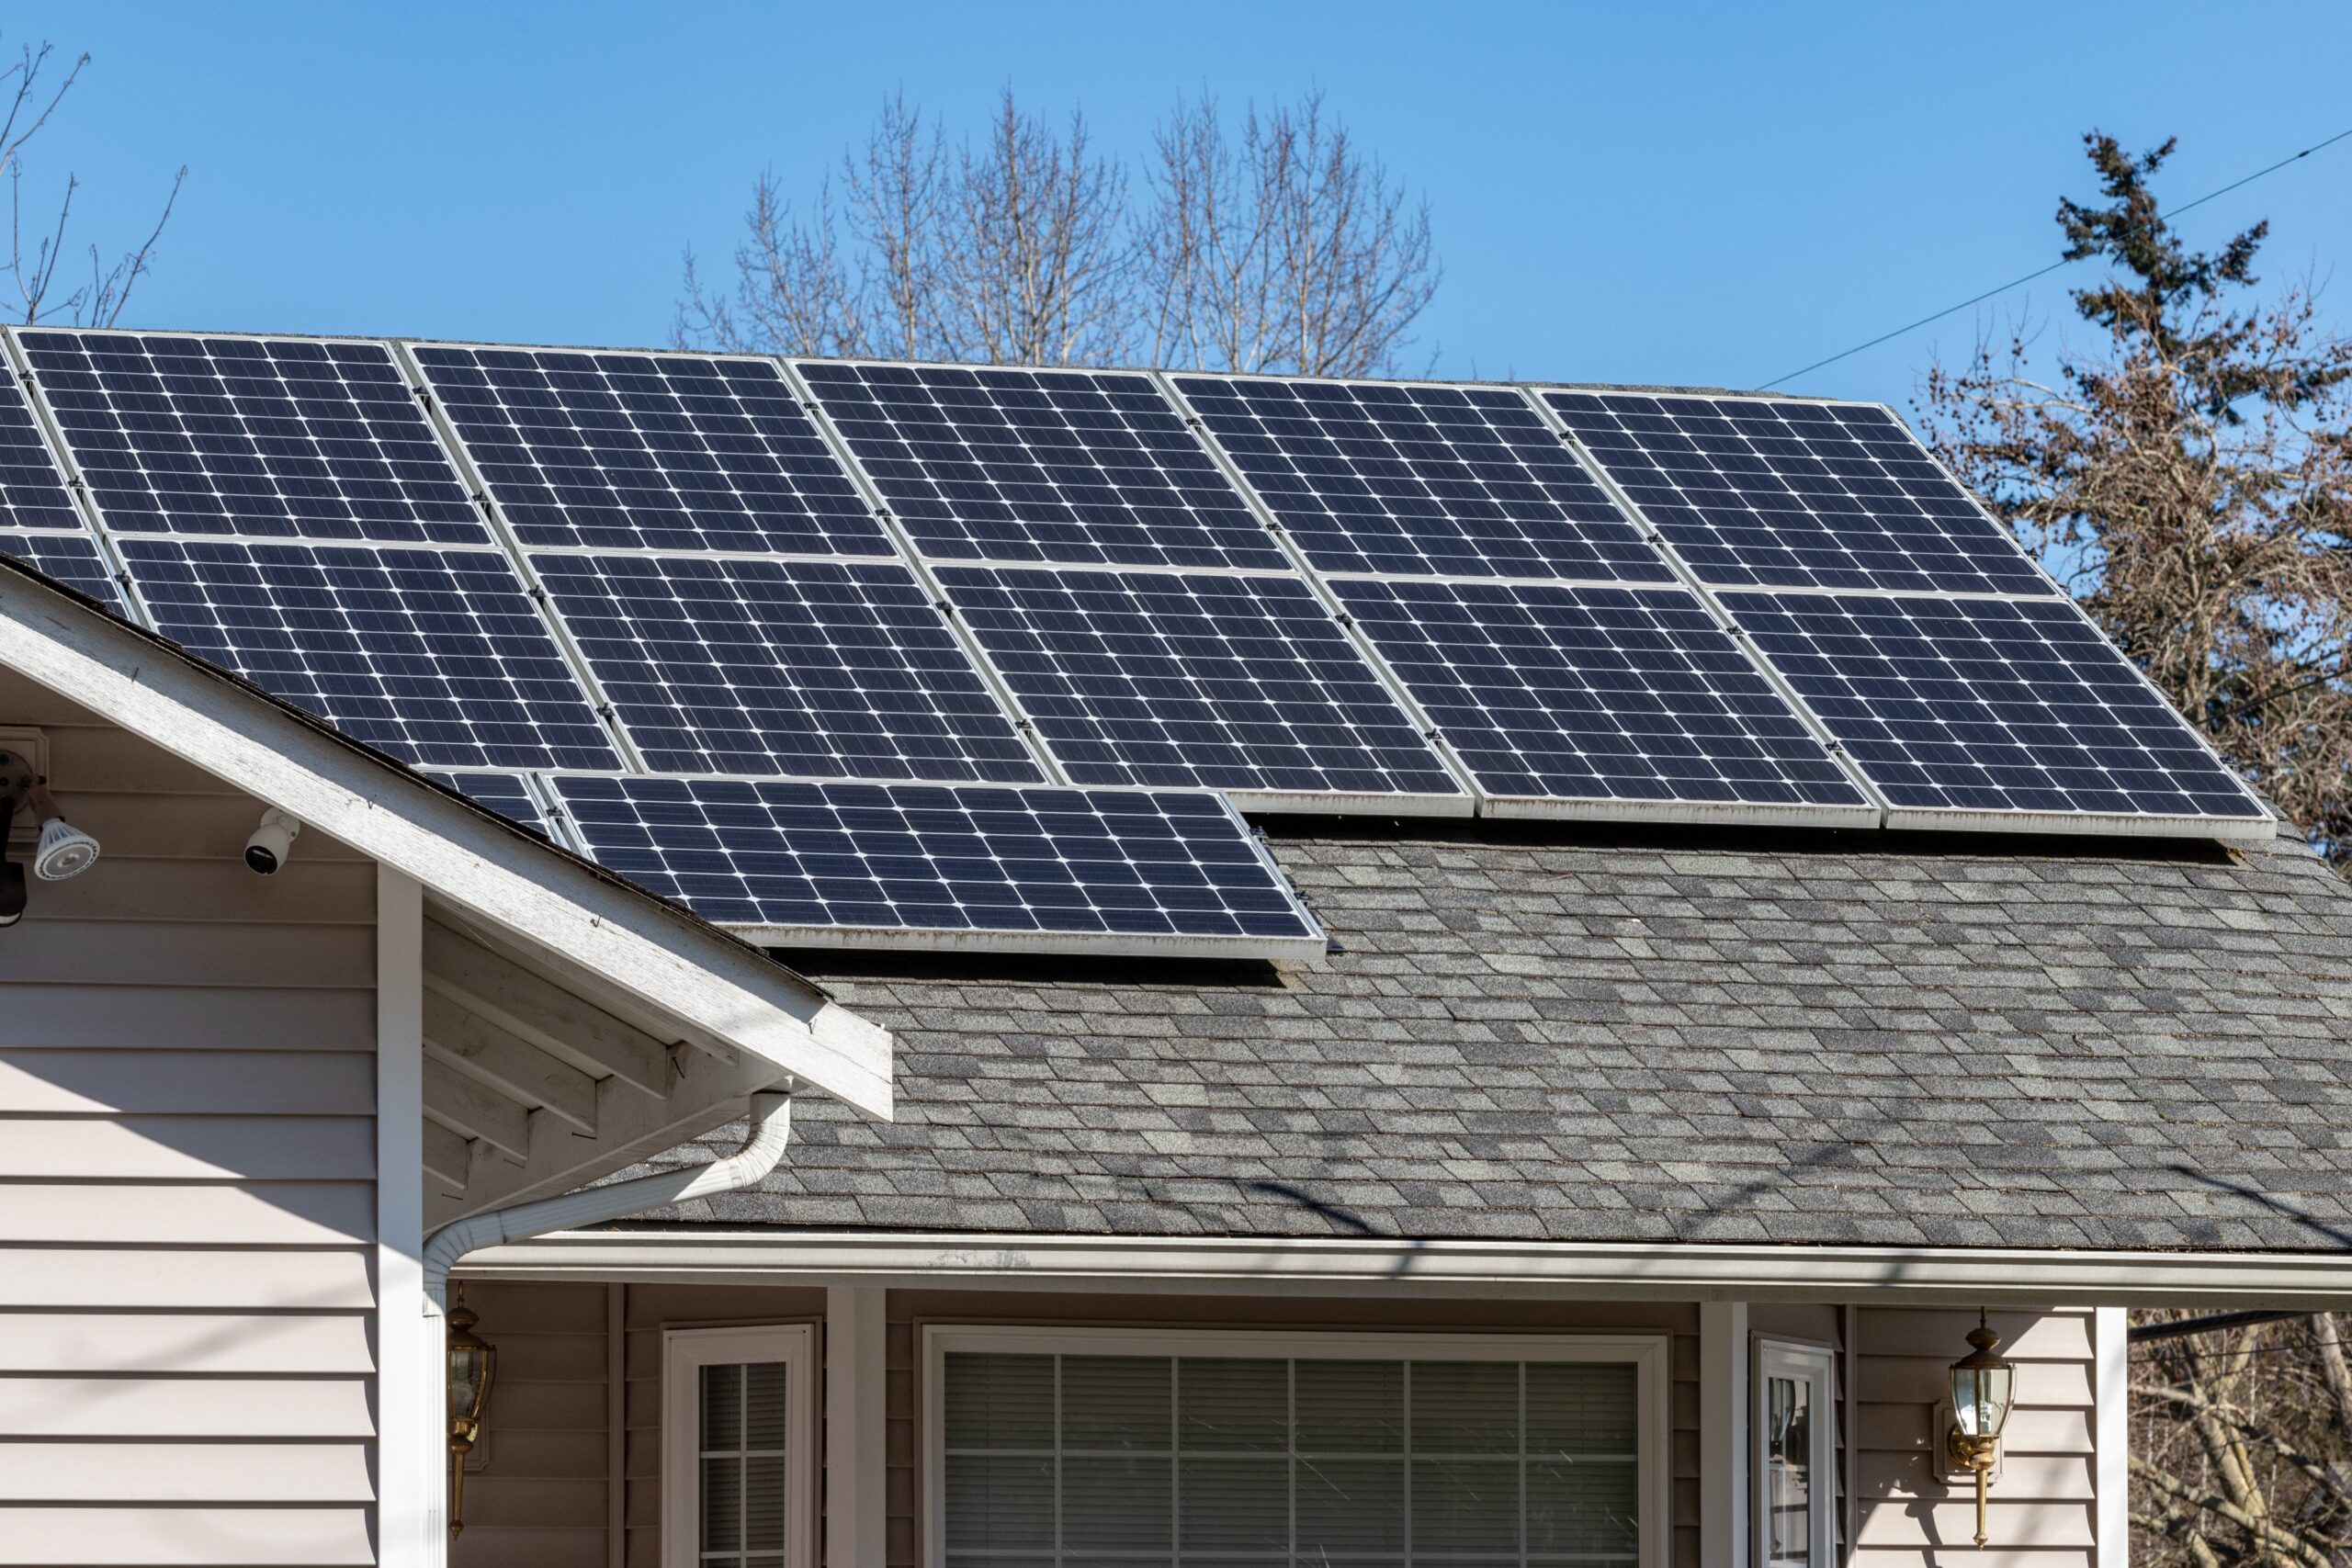 Does Your State Offer Tax Credits for Solar Power